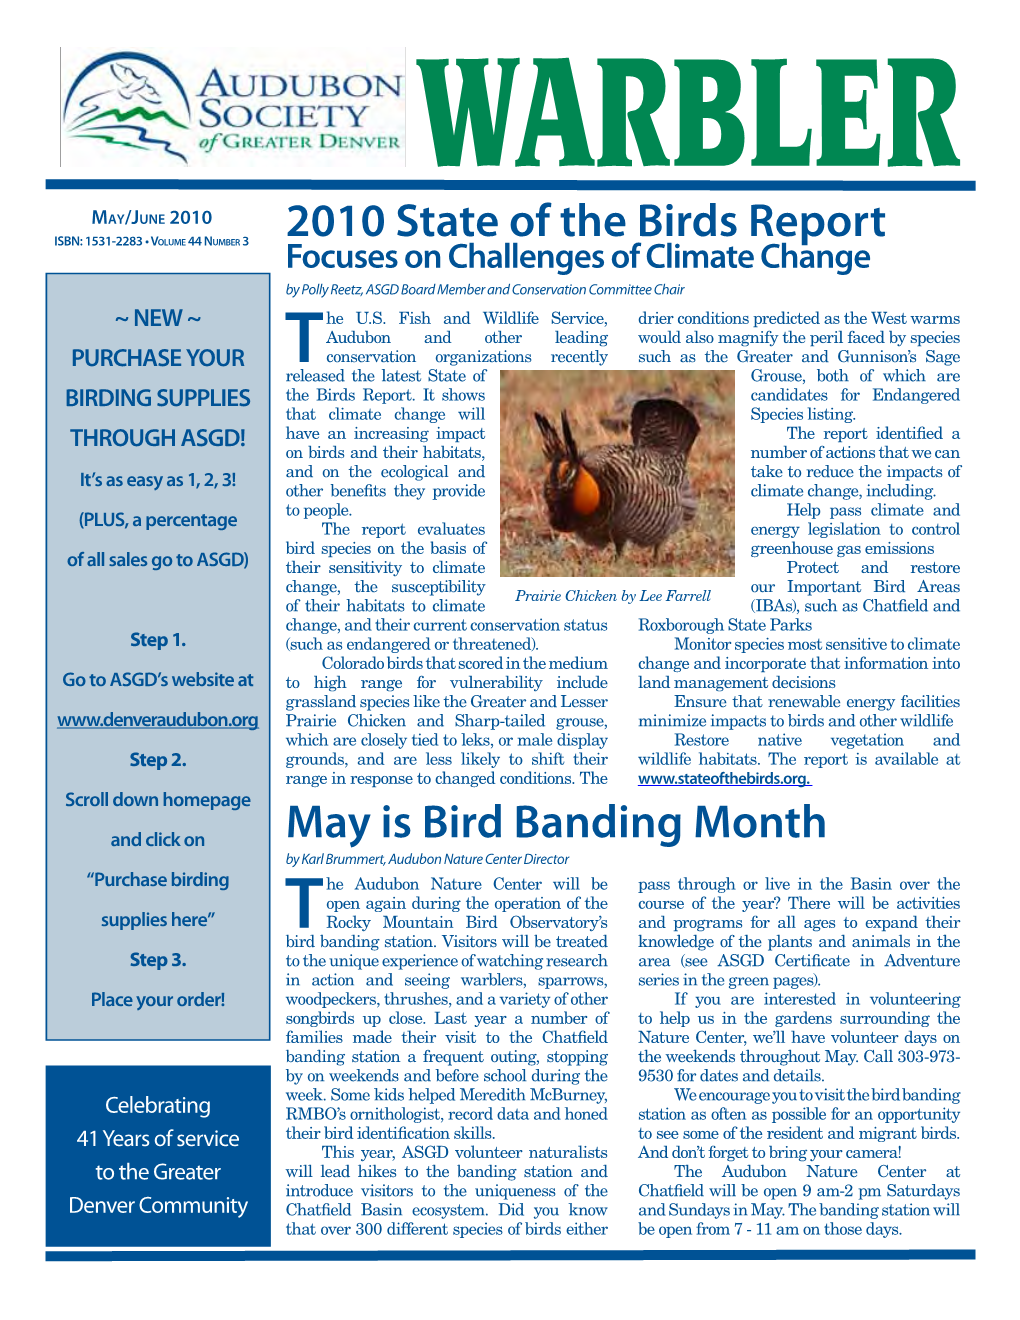 2010 State of the Birds Report May Is Bird Banding Month